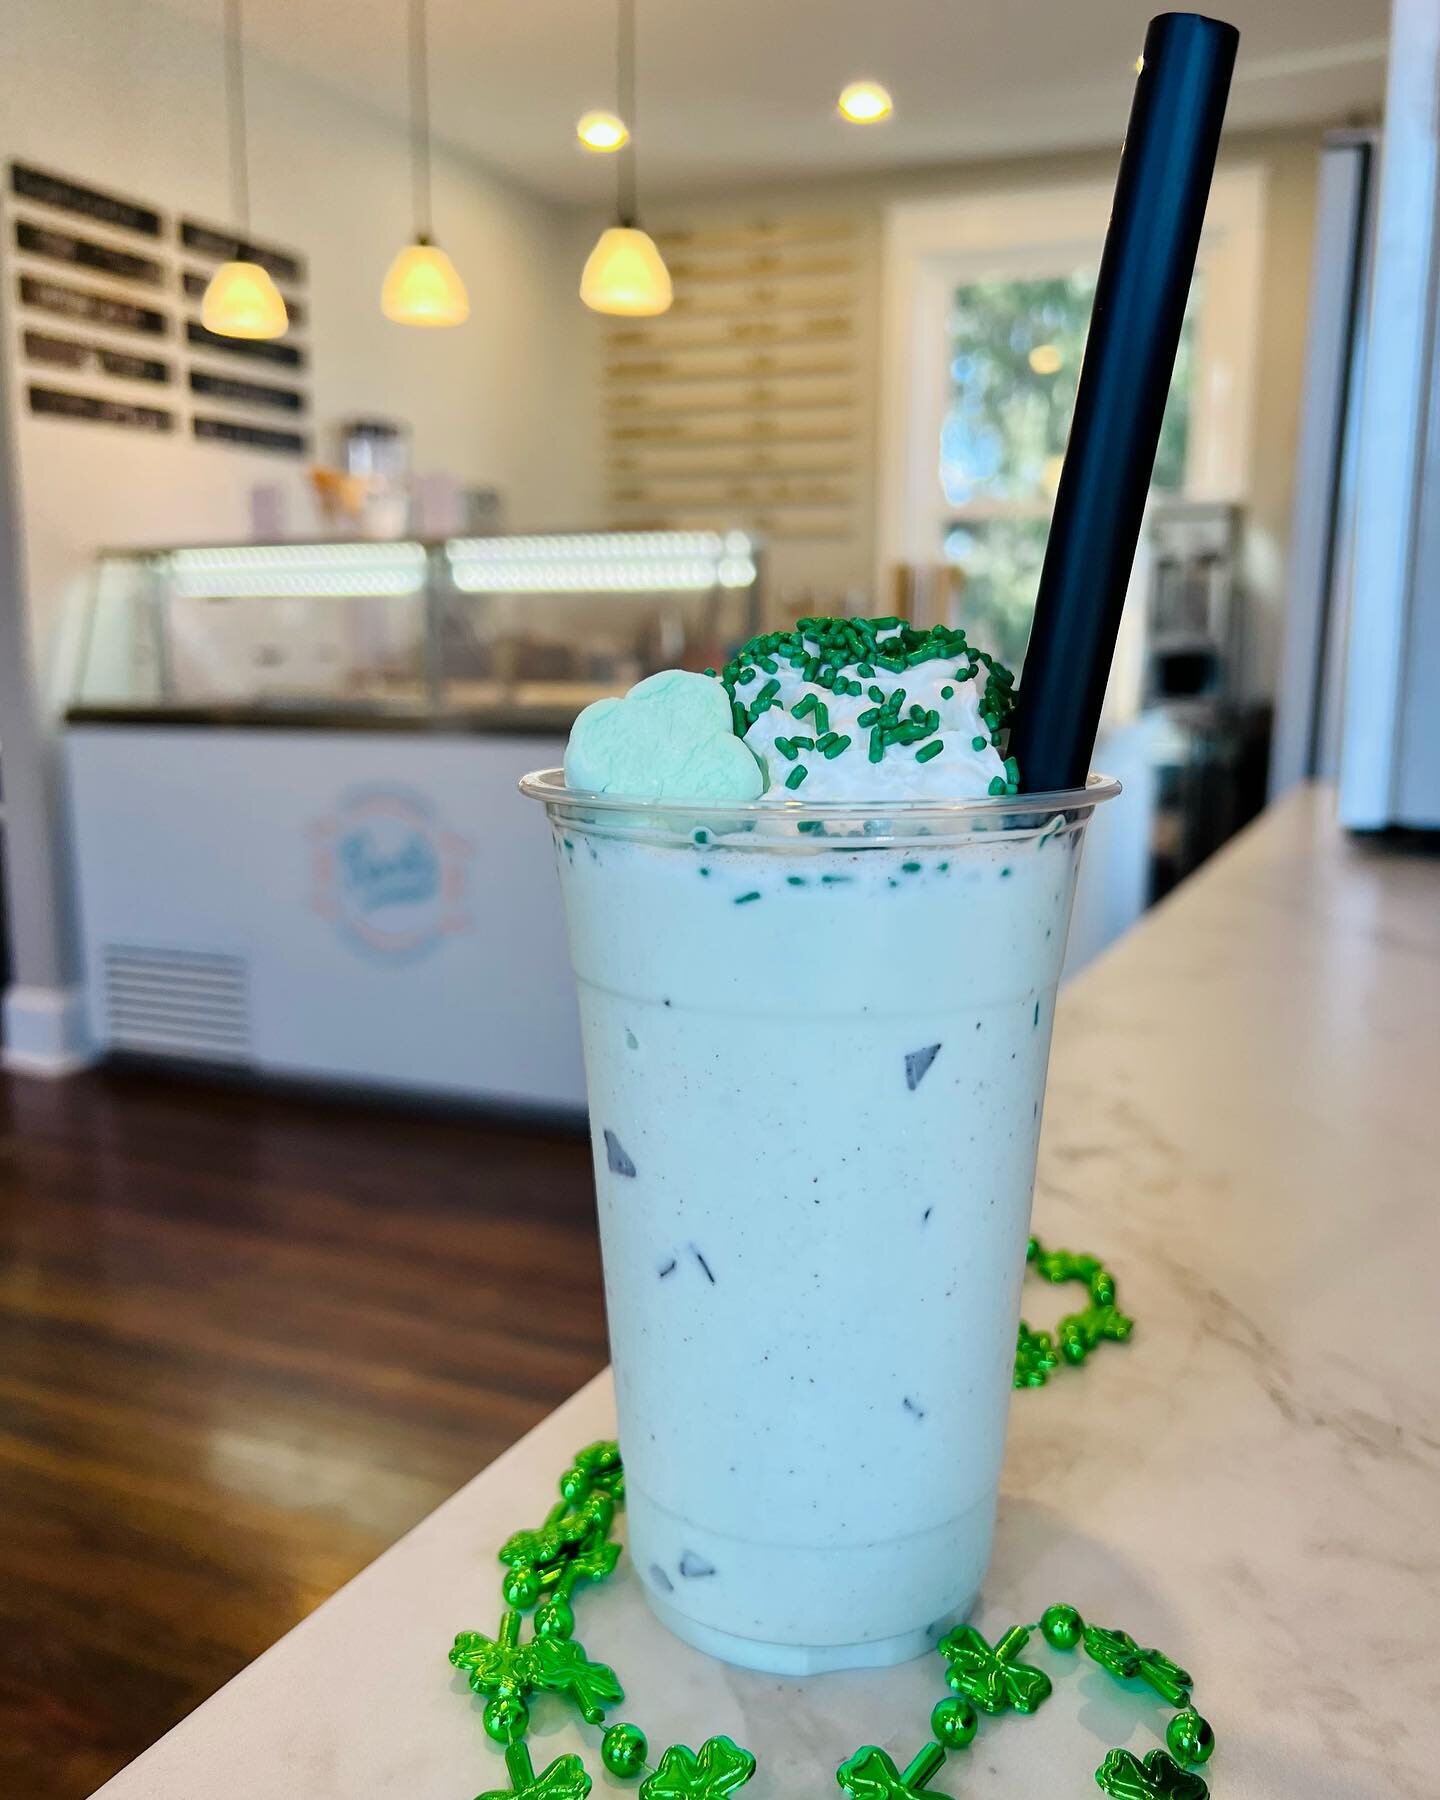 🍀 We&rsquo;re kicking off the St. Patrick&rsquo;s Day celebrations with our Lucky Shakes! 🍀

(It&rsquo;s a delicious mint chocolate chip milkshake garnished with green sprinkles, whipped cream and a Lucky Charm marshmallow)